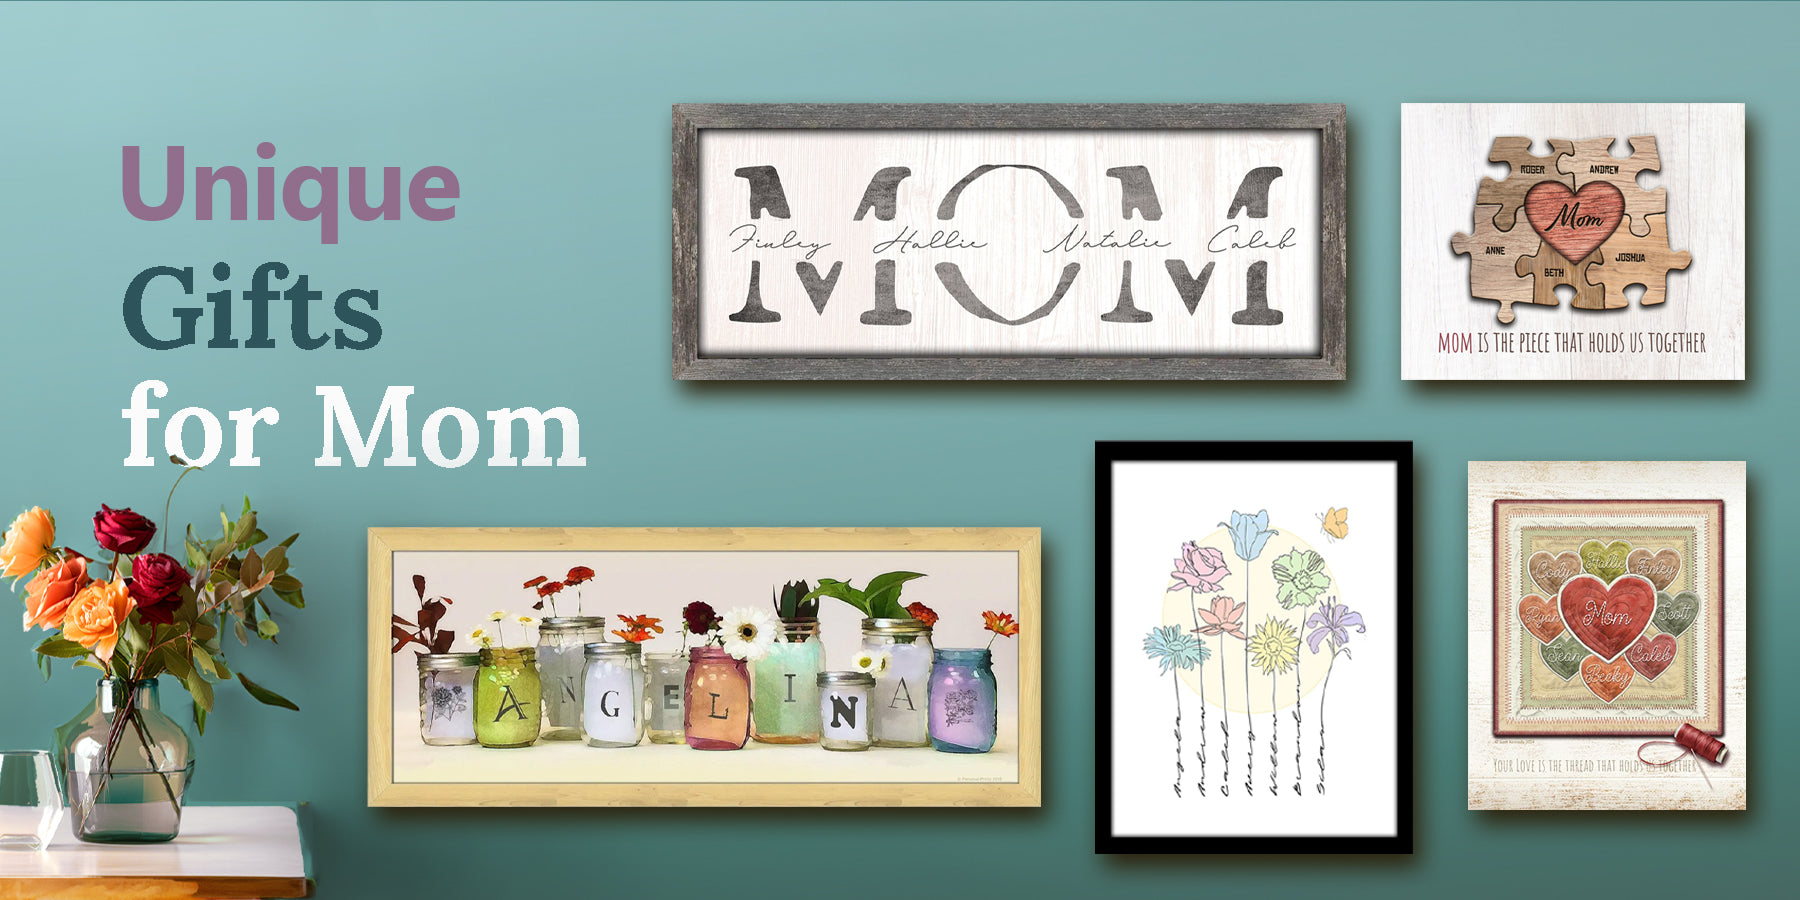 Unique gifts for mom, personalized by you!